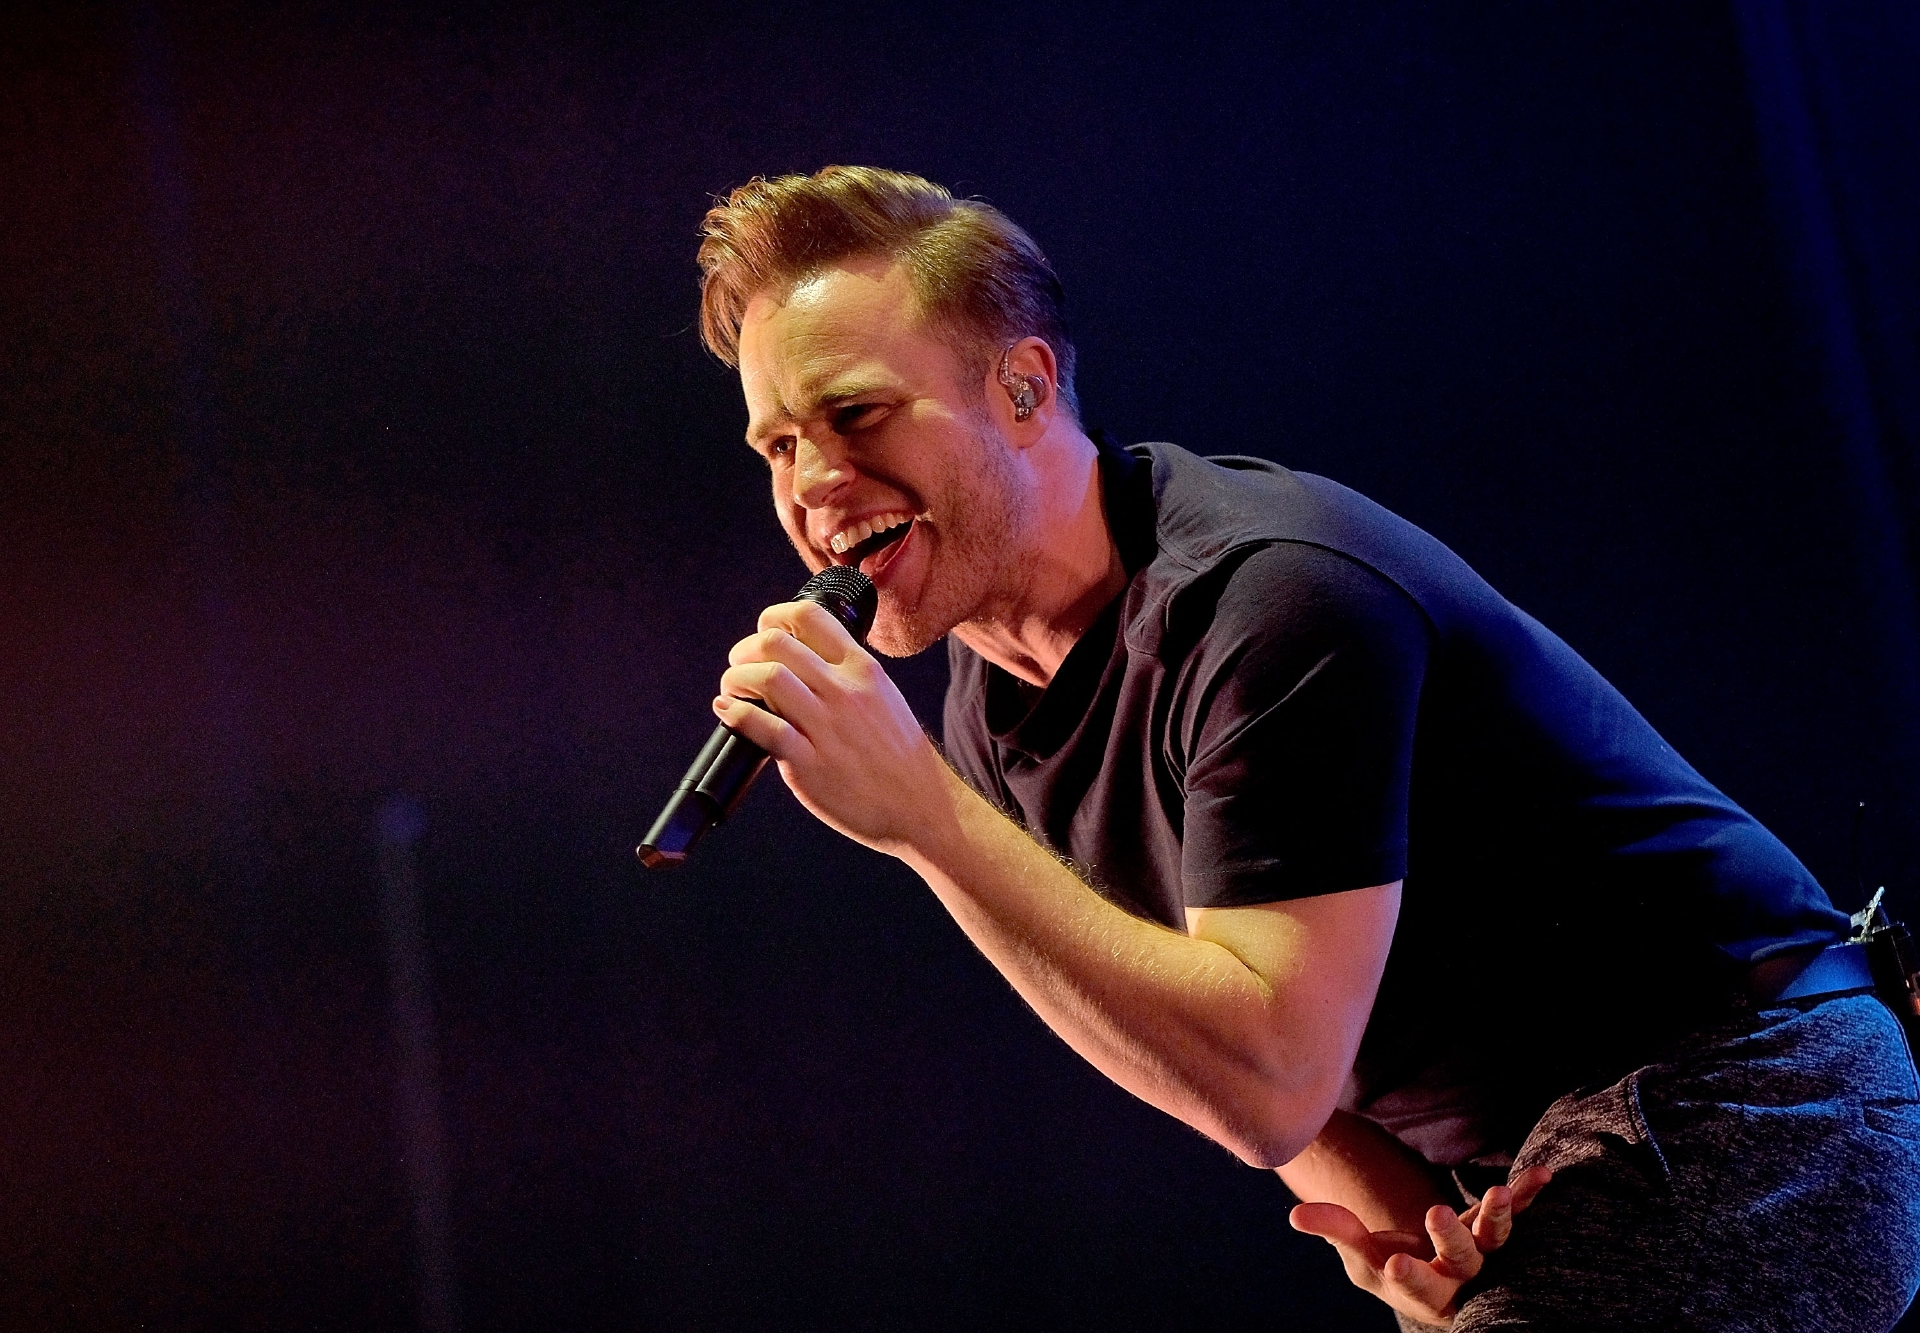 Olly Murs performs on stage.